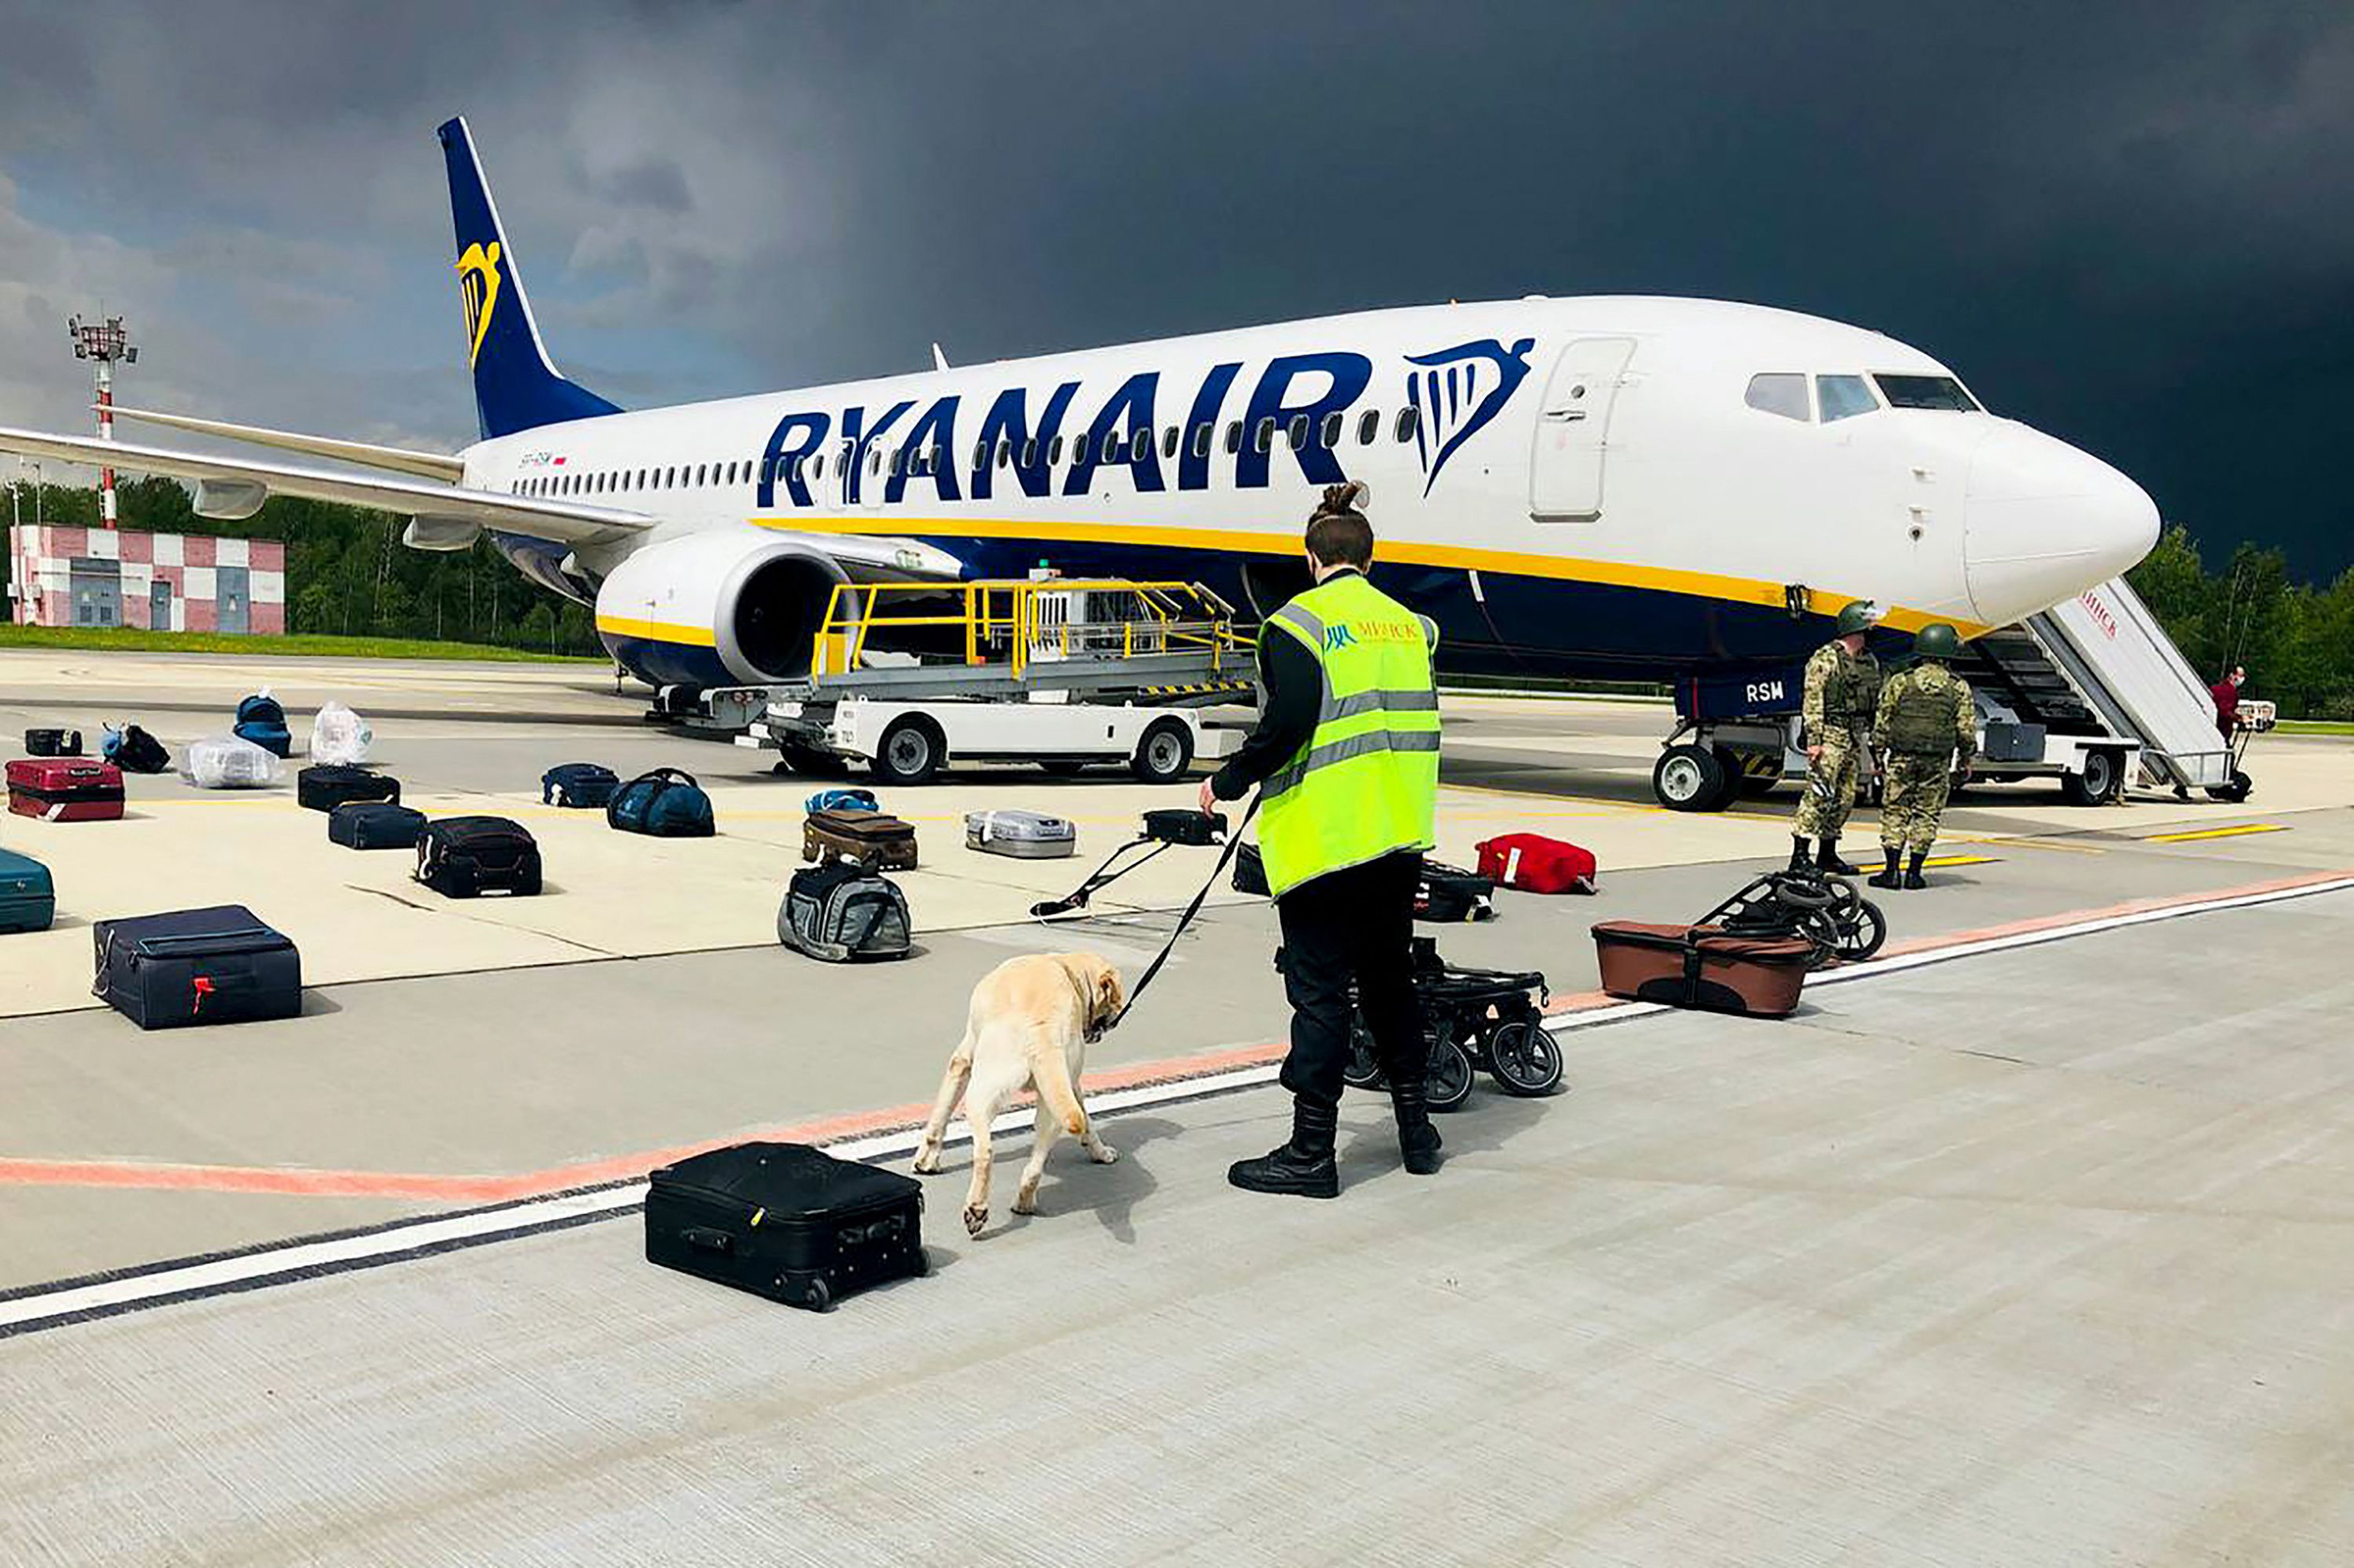 A Belarusian dog handler checks luggage after the Ryanair flight landed in Minsk on May 23, 2021.